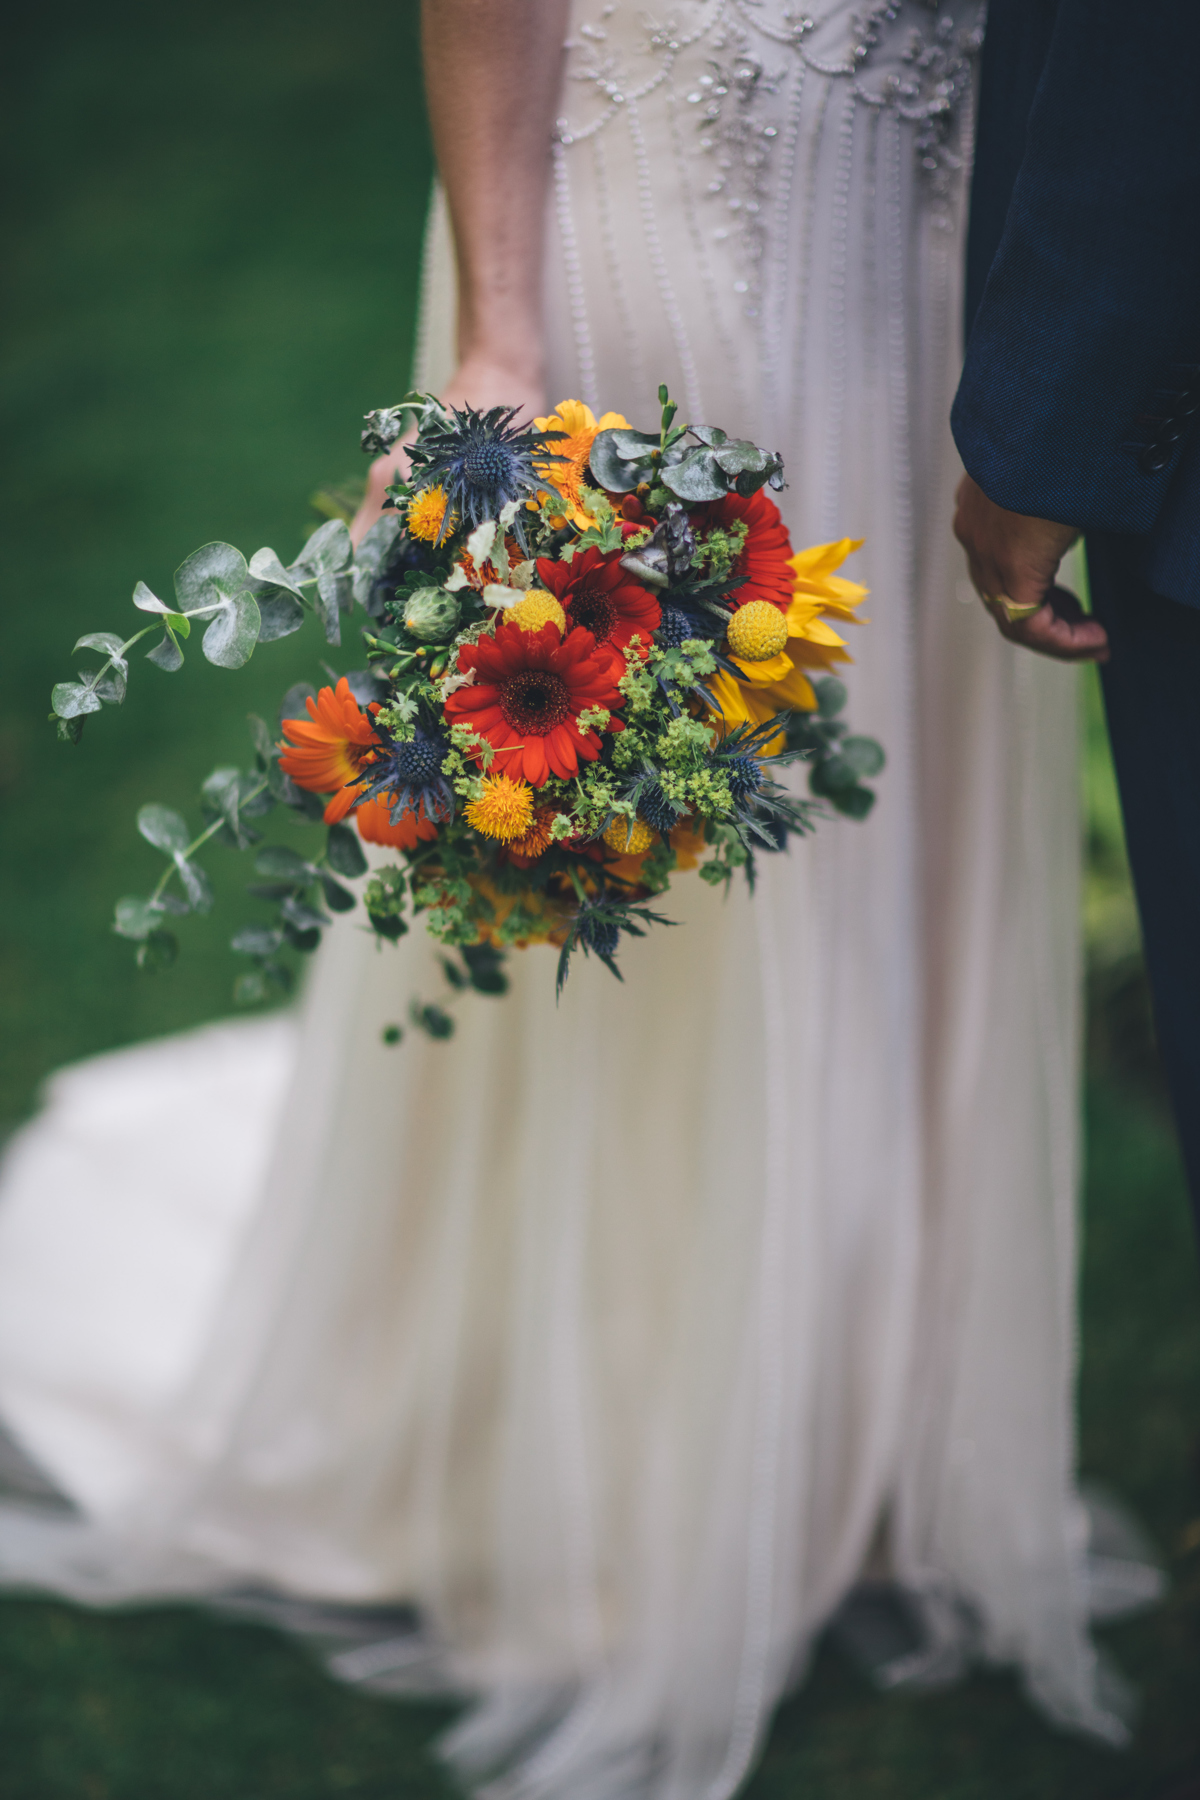 Bride holding a colourful bouquet of orange, yellow and green flowers and foliage, with only the bouquet, the lower half of the brides dress and the grooms arm and hand in the shot